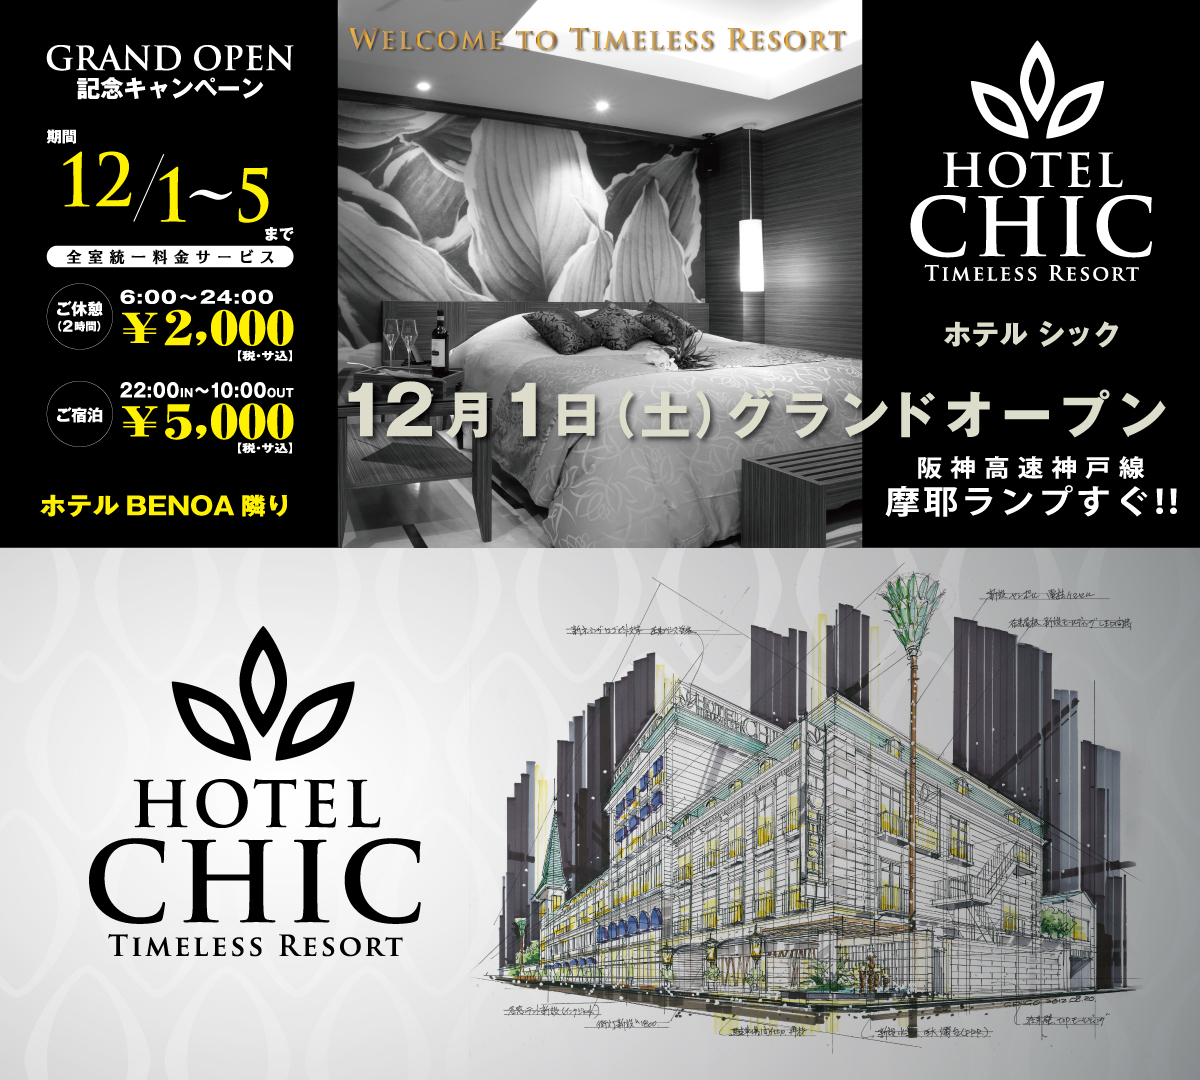 HOTEL CHIC TIMELESS RESORT COMING SOON